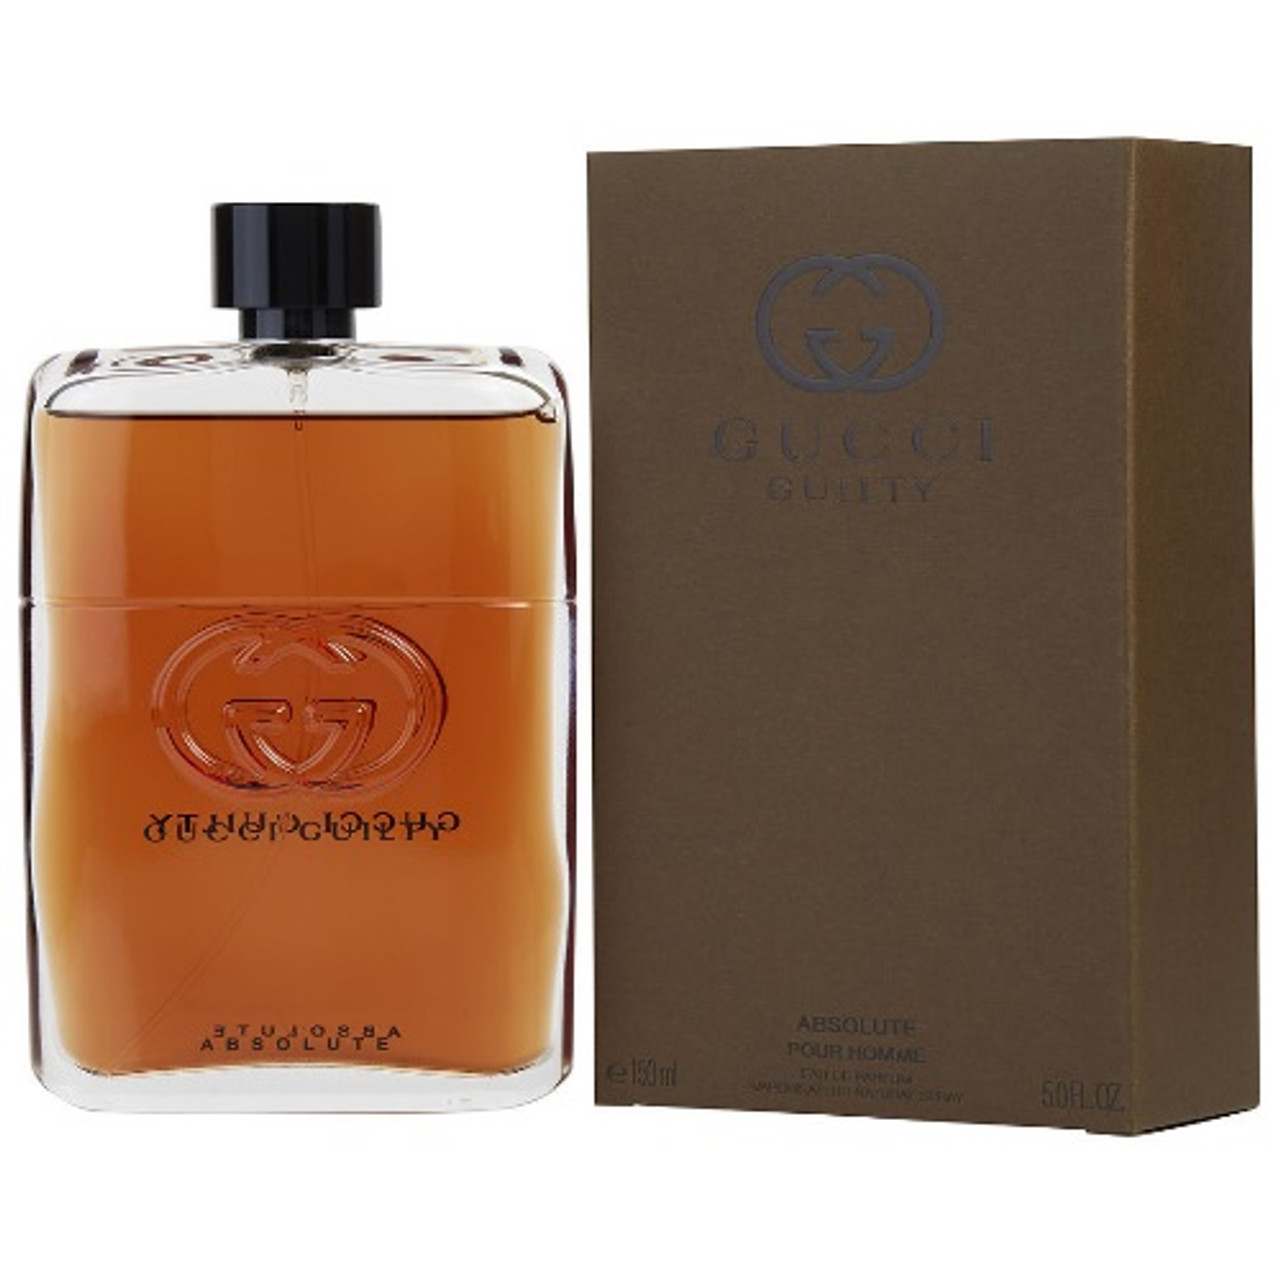 Gucci guilty absolute pour. Gucci Gucci guilty absolute pour homme. Gucci guilty absolute EDP. Gucci guilty absolute pour homme 50ml. Gucci guilty absolute Gucci.